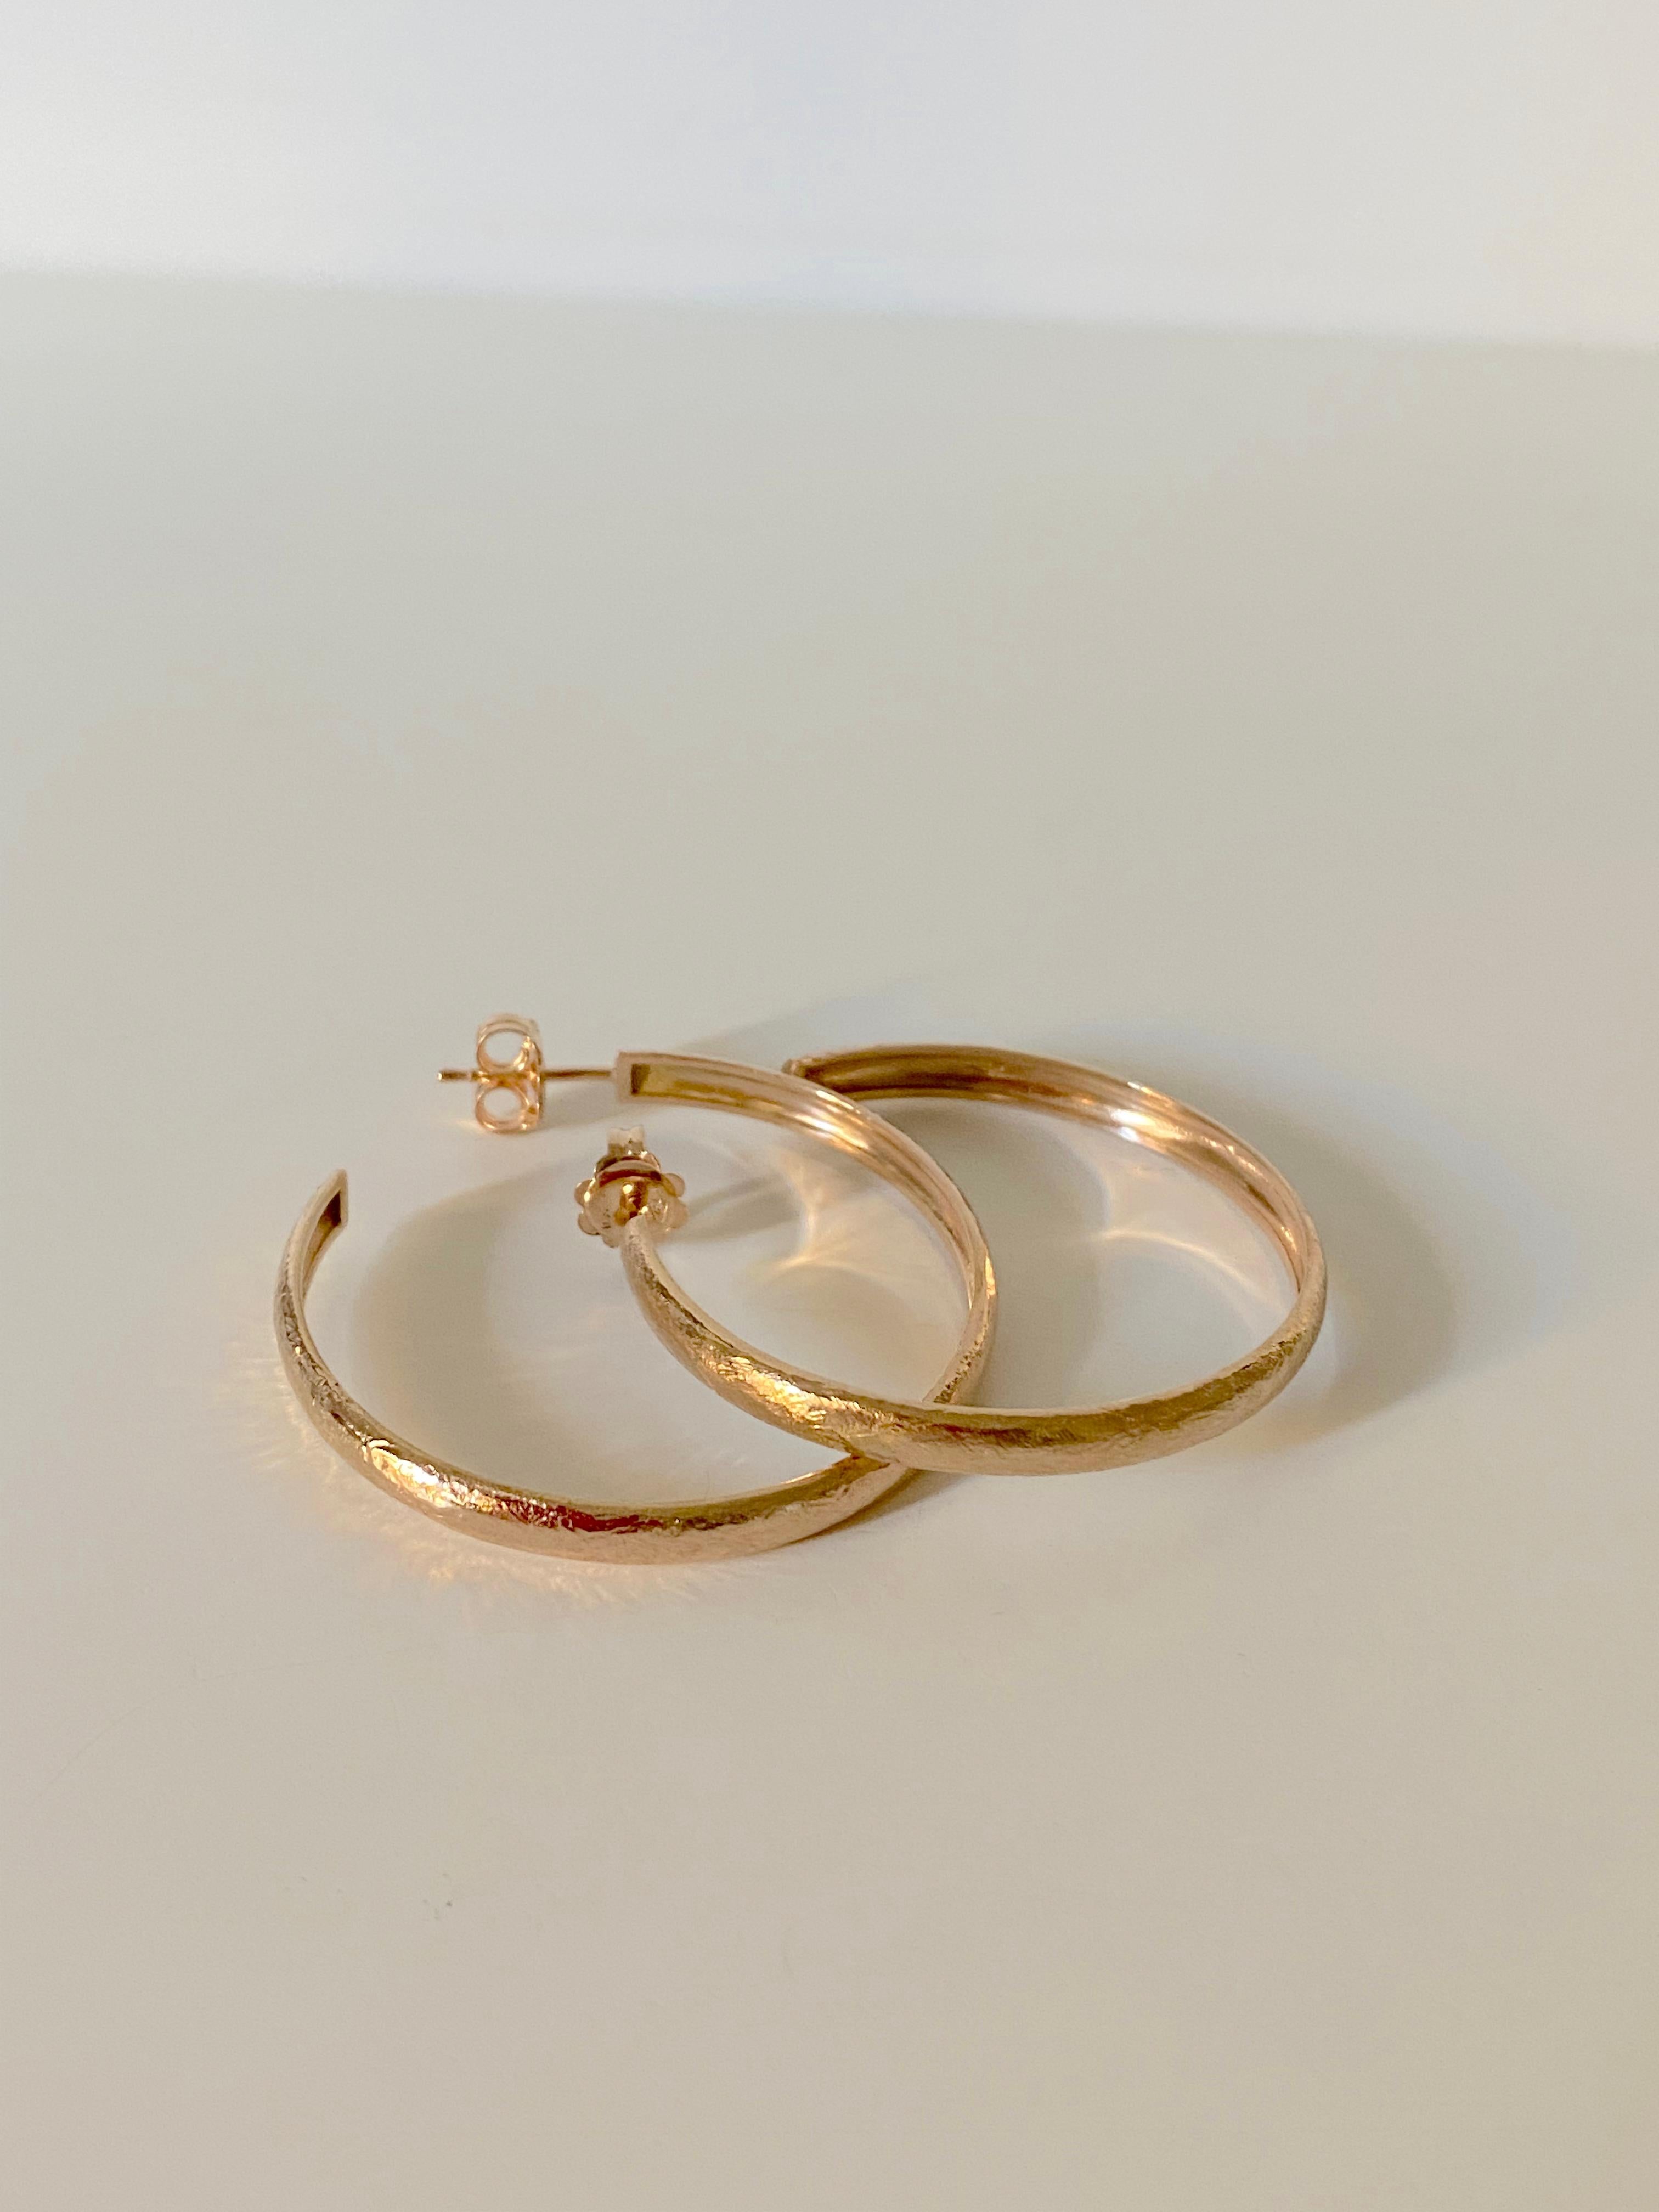 Handcrafted Hammered 18K Yellow Gold Scratched Satin Design Hoops Earrings  For Sale 3